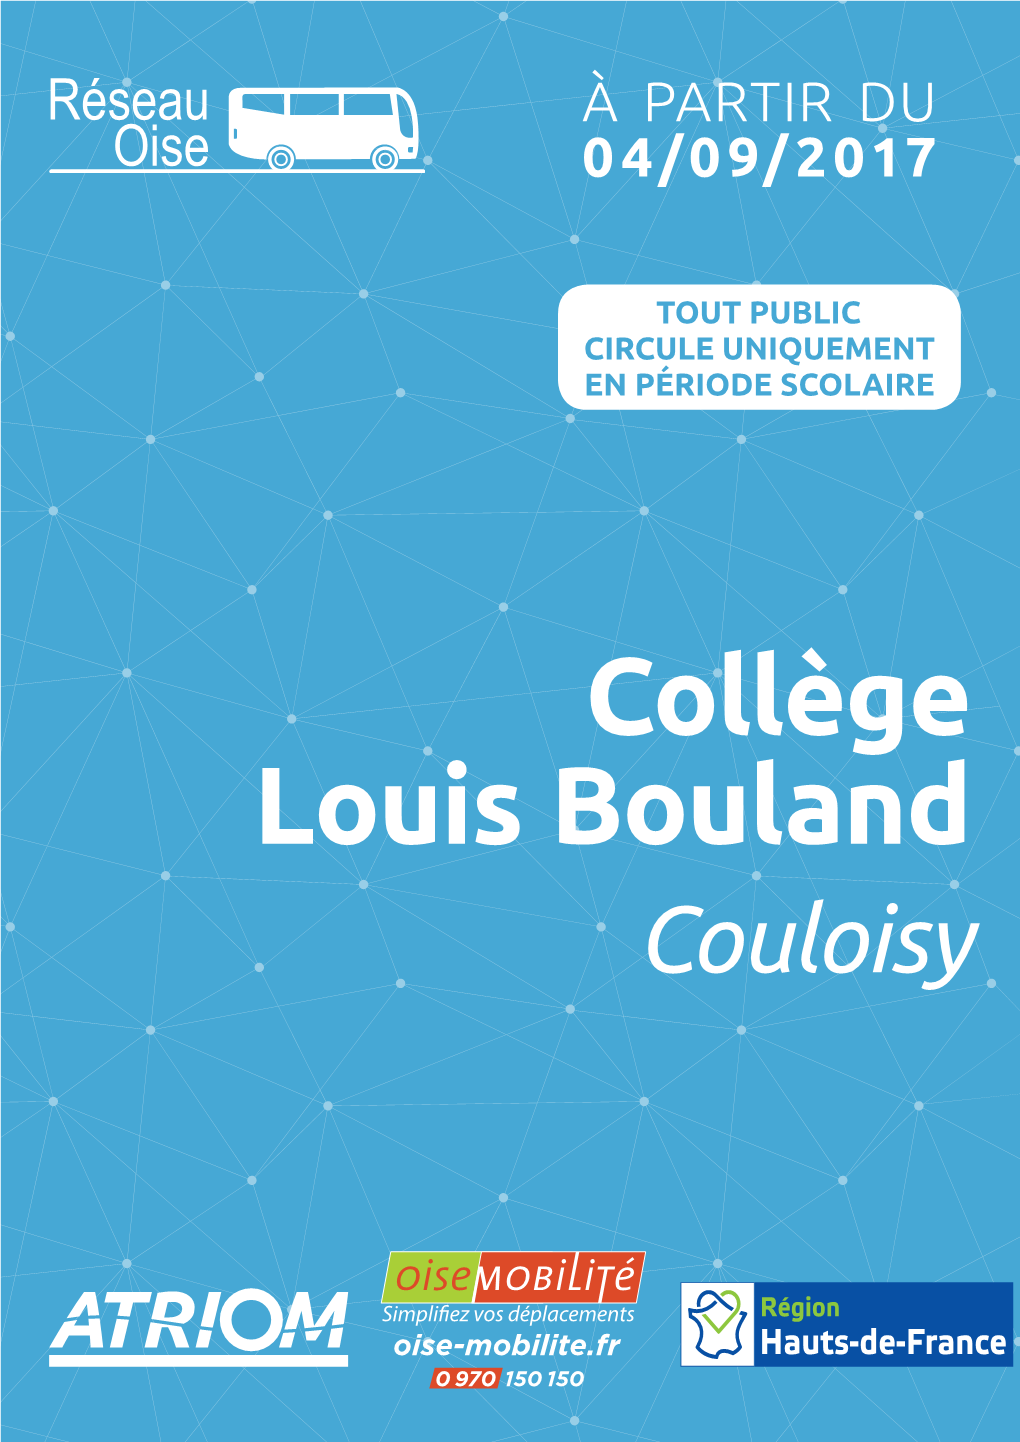 Collège Louis Bouland Couloisy